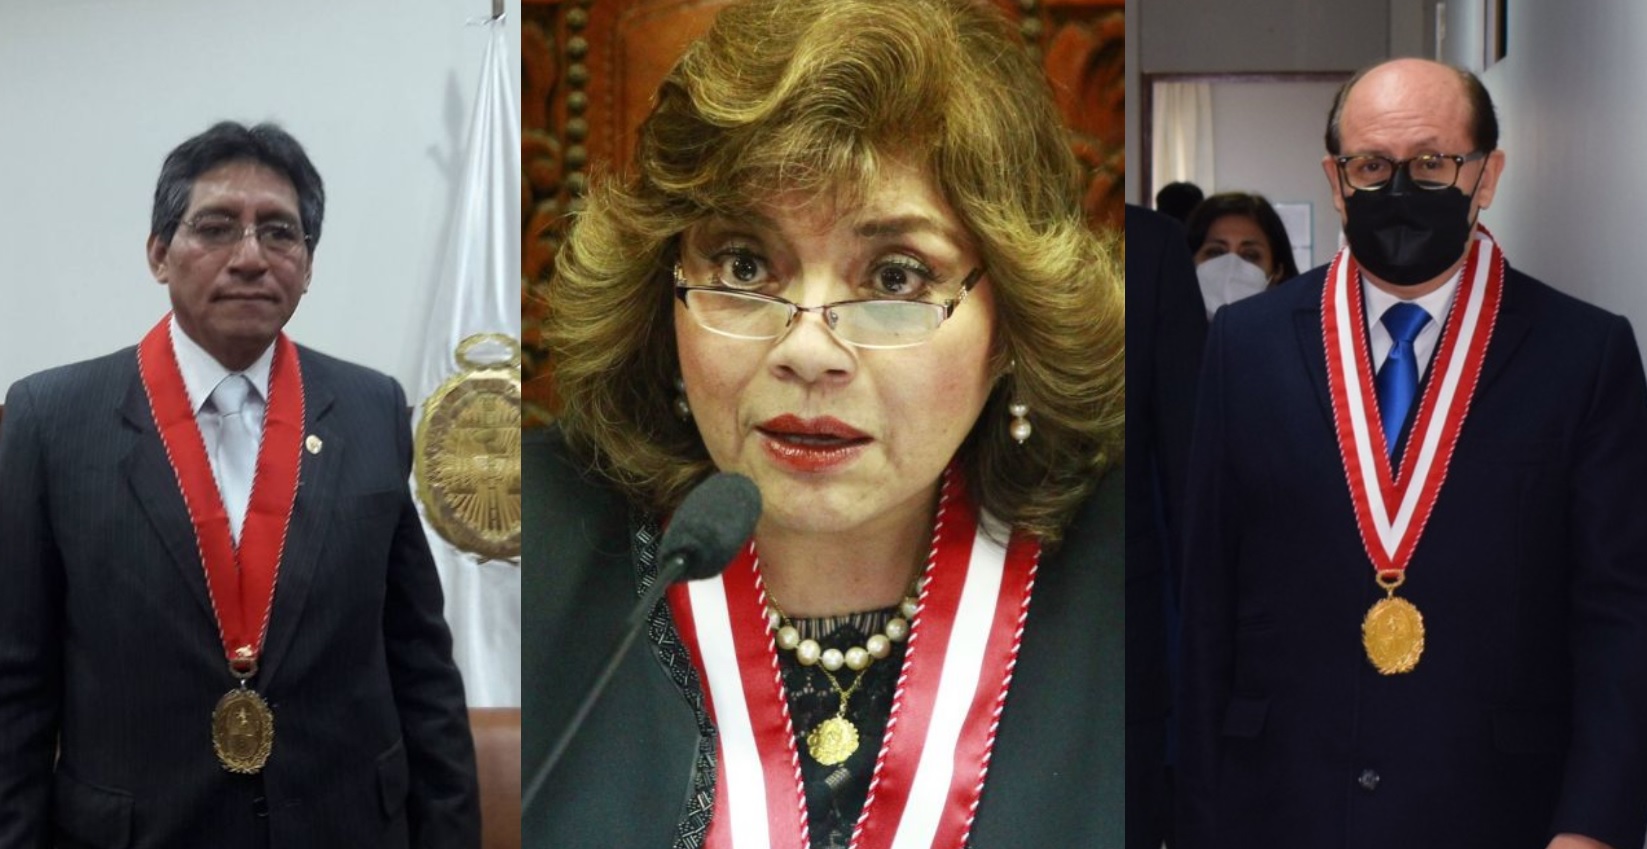 Franklin Tomy López or Helder Terán Dianderas could replace Zoraida Ávalos in case she is disqualified by Congress.